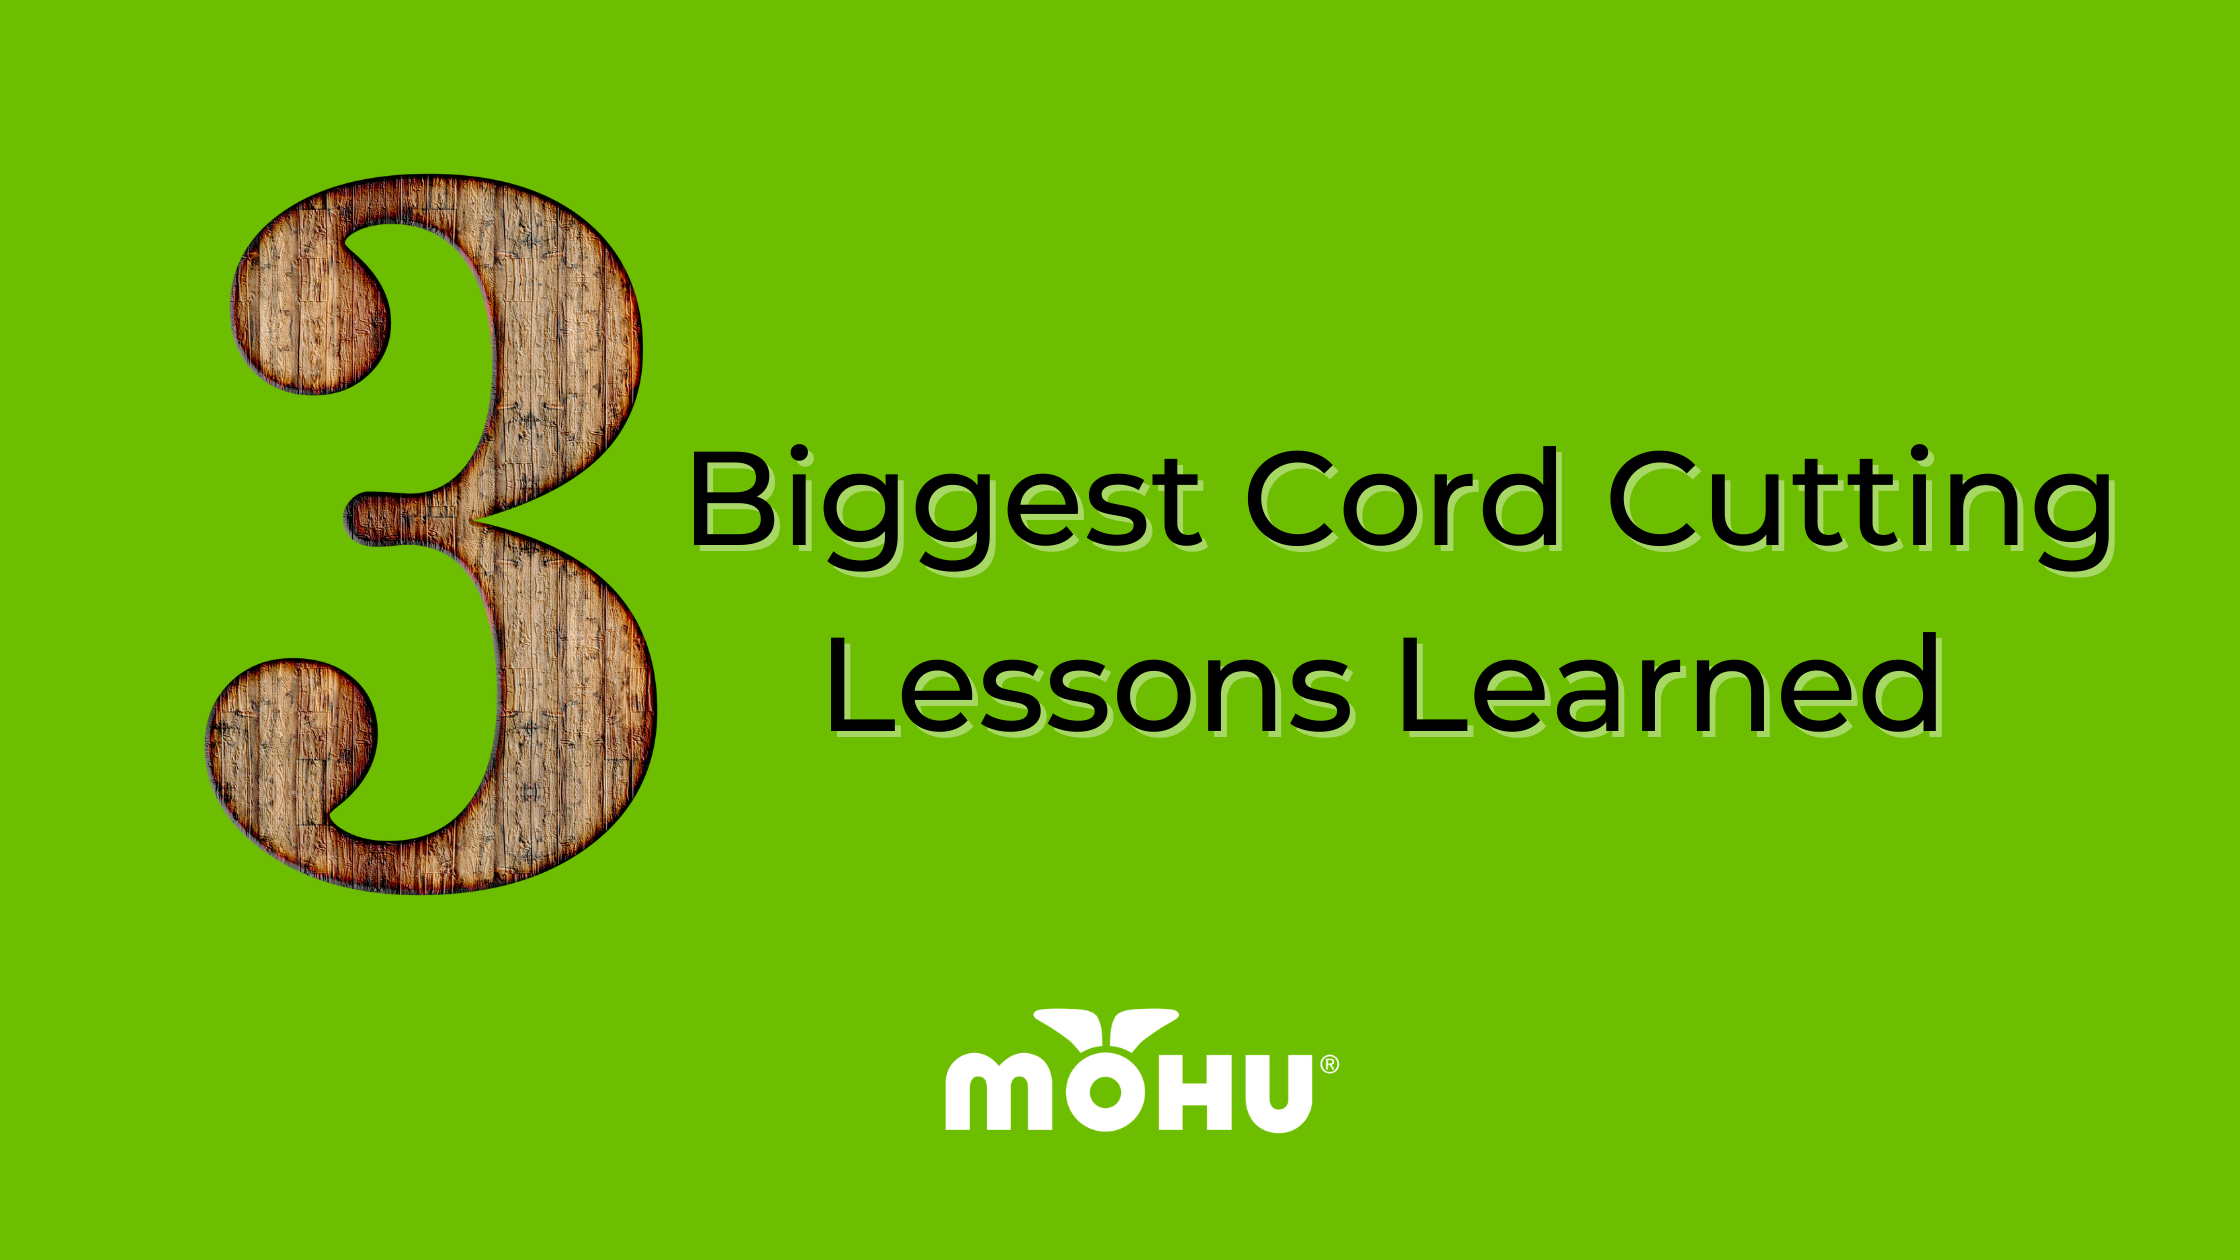 Cord Cutting: 3 Biggest Lessons Learned - KillTheCableBill.com, Mohu